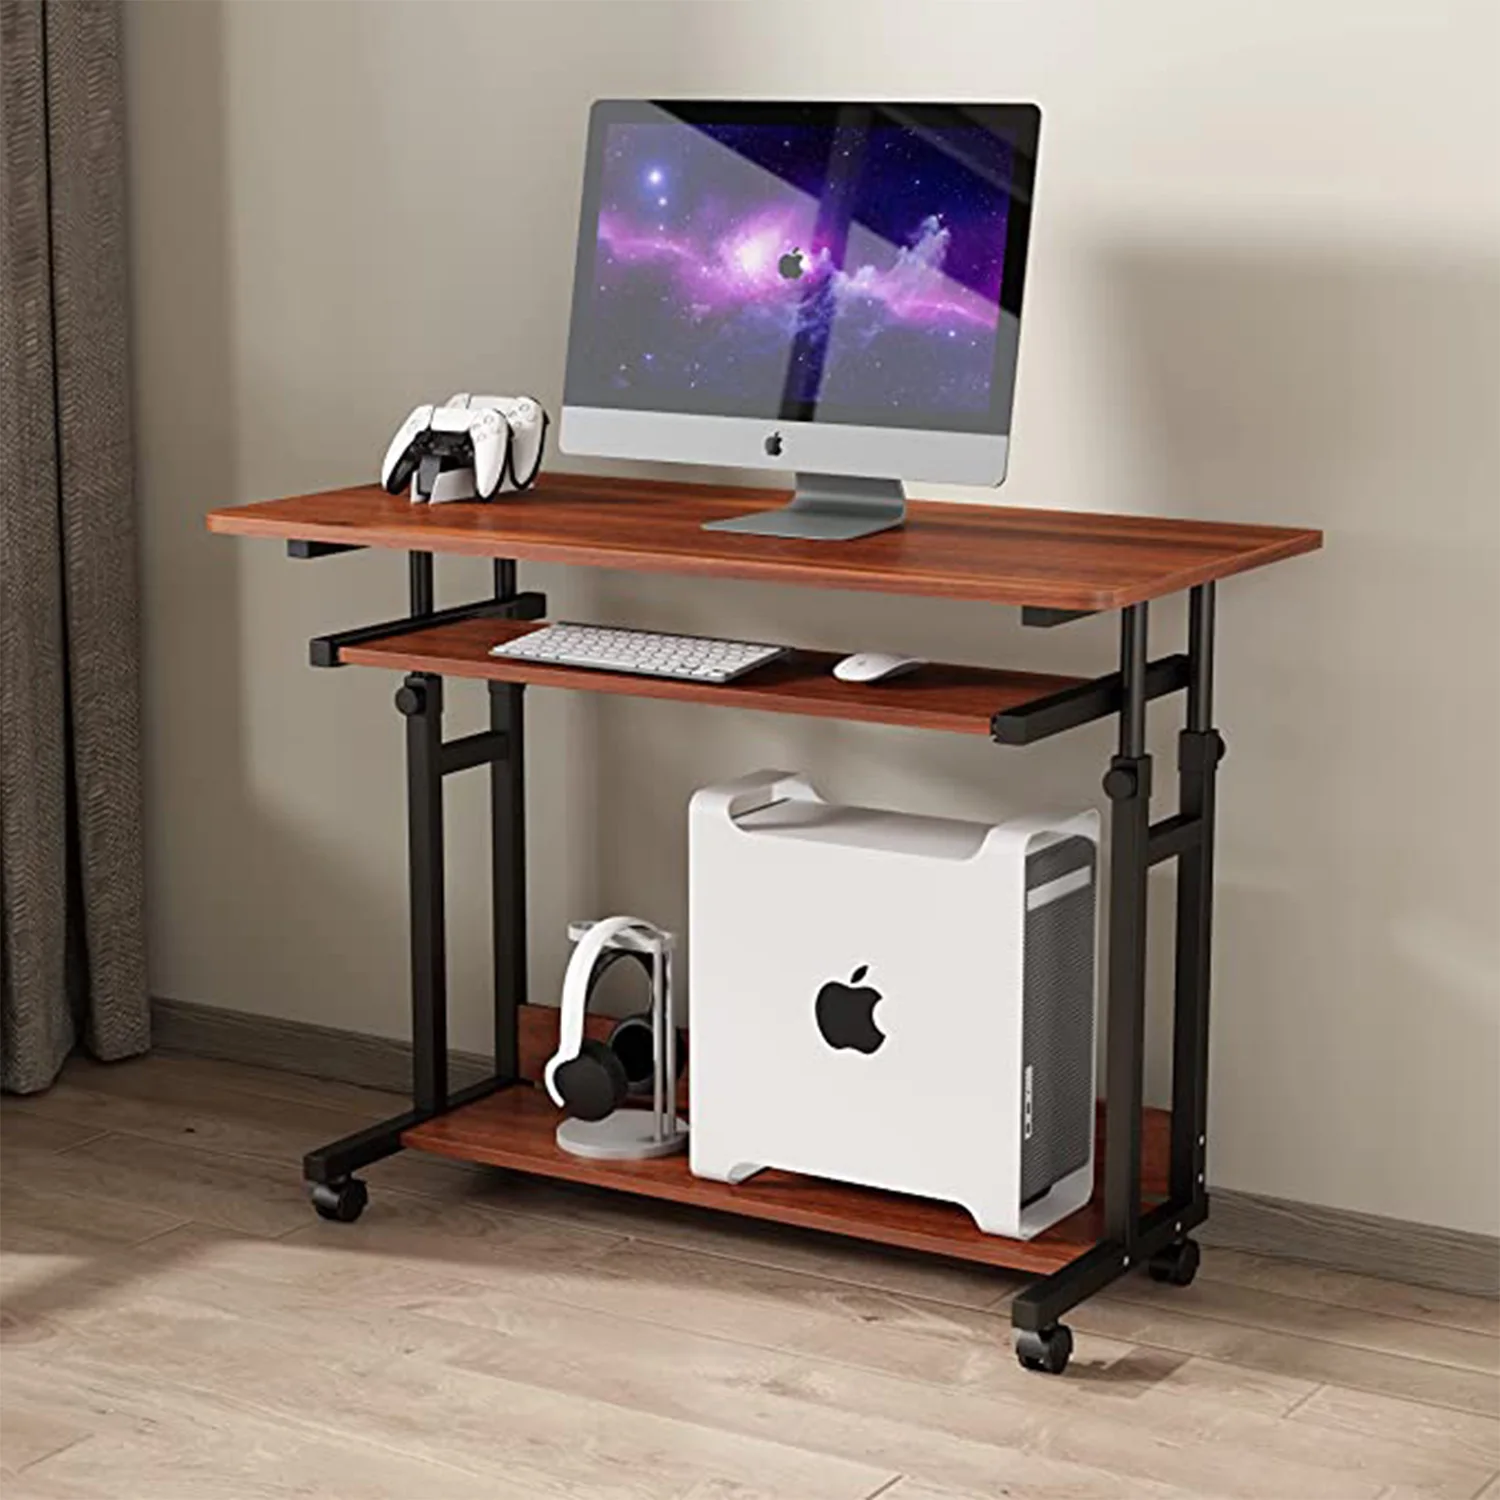 Collectief tand Wig Computer Desk Table Wheels | Us Wheel Computer Desk | Ecmarvellous Desk |  Desk Side Table - Computer Desks - Aliexpress